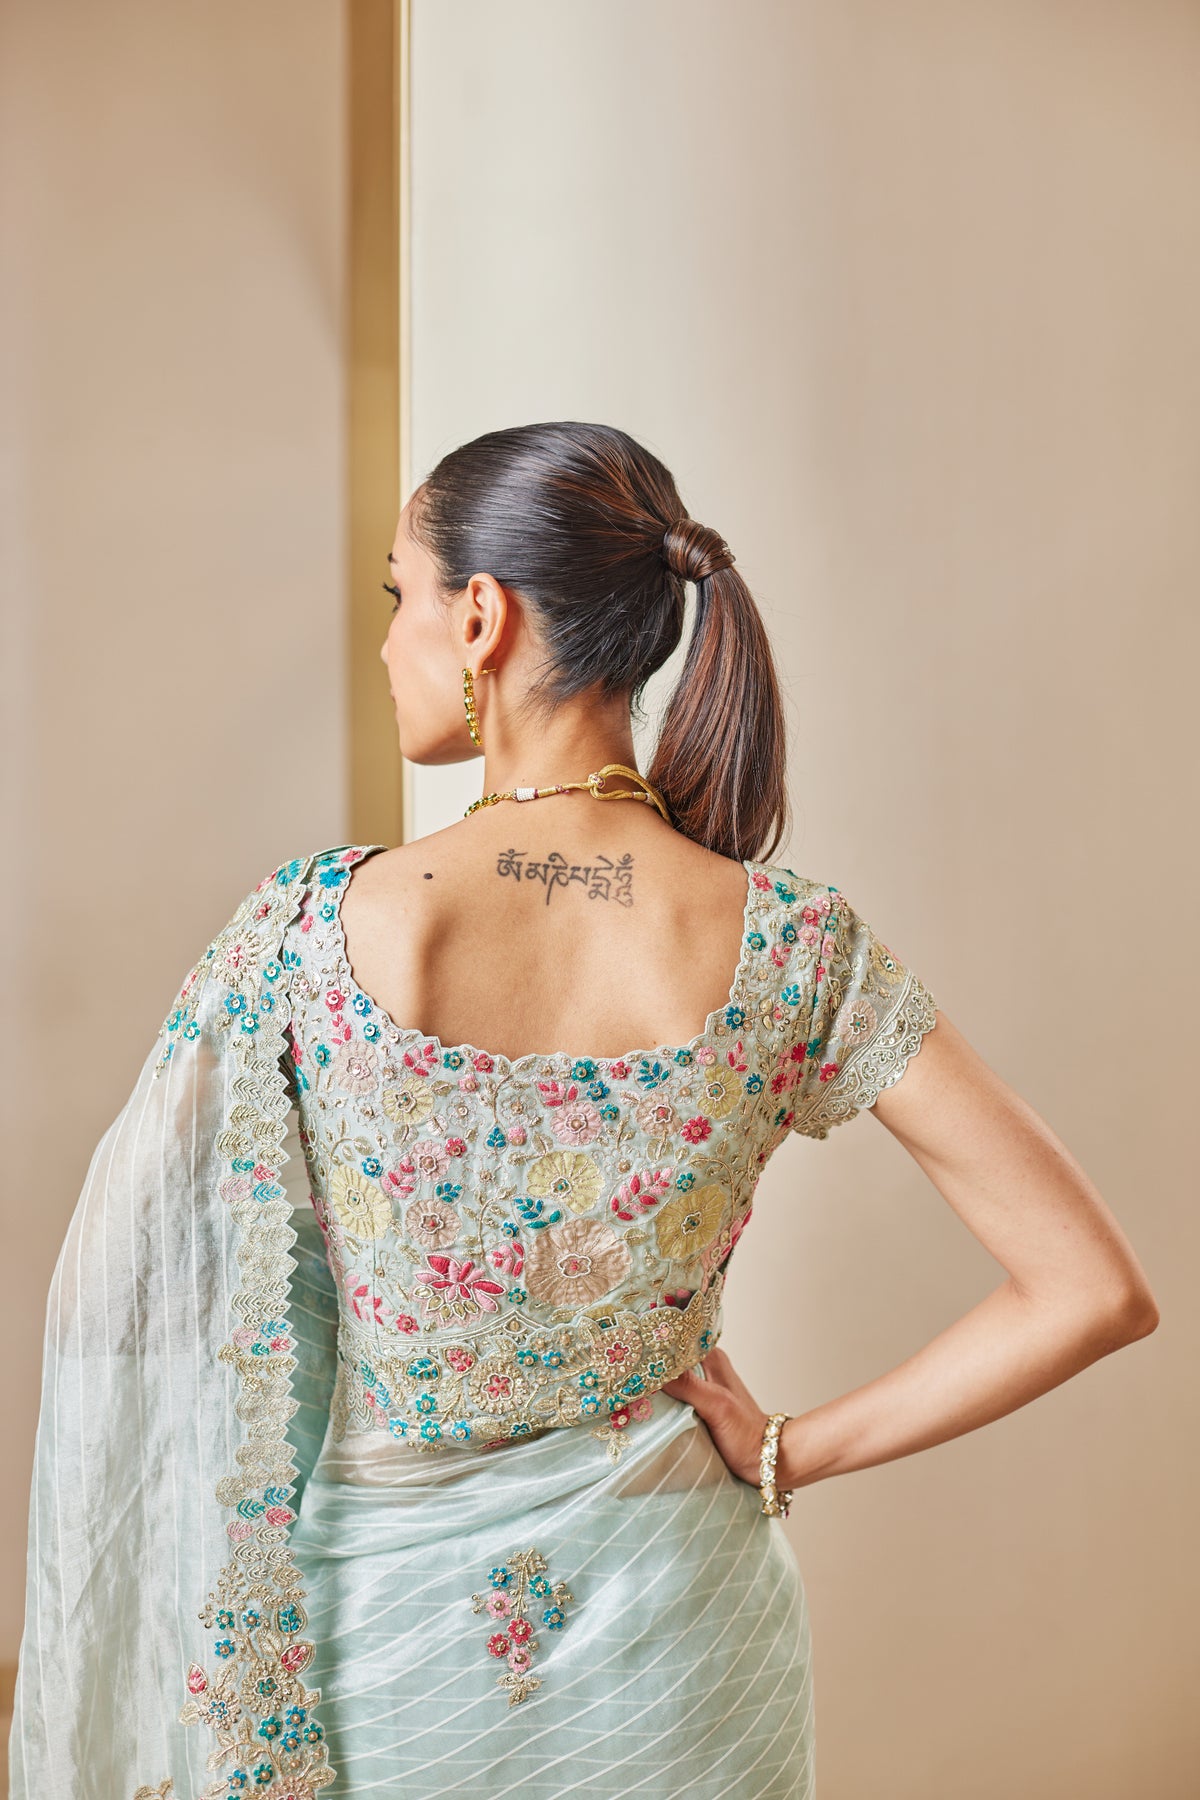 Winter Mint Embroidered Saree